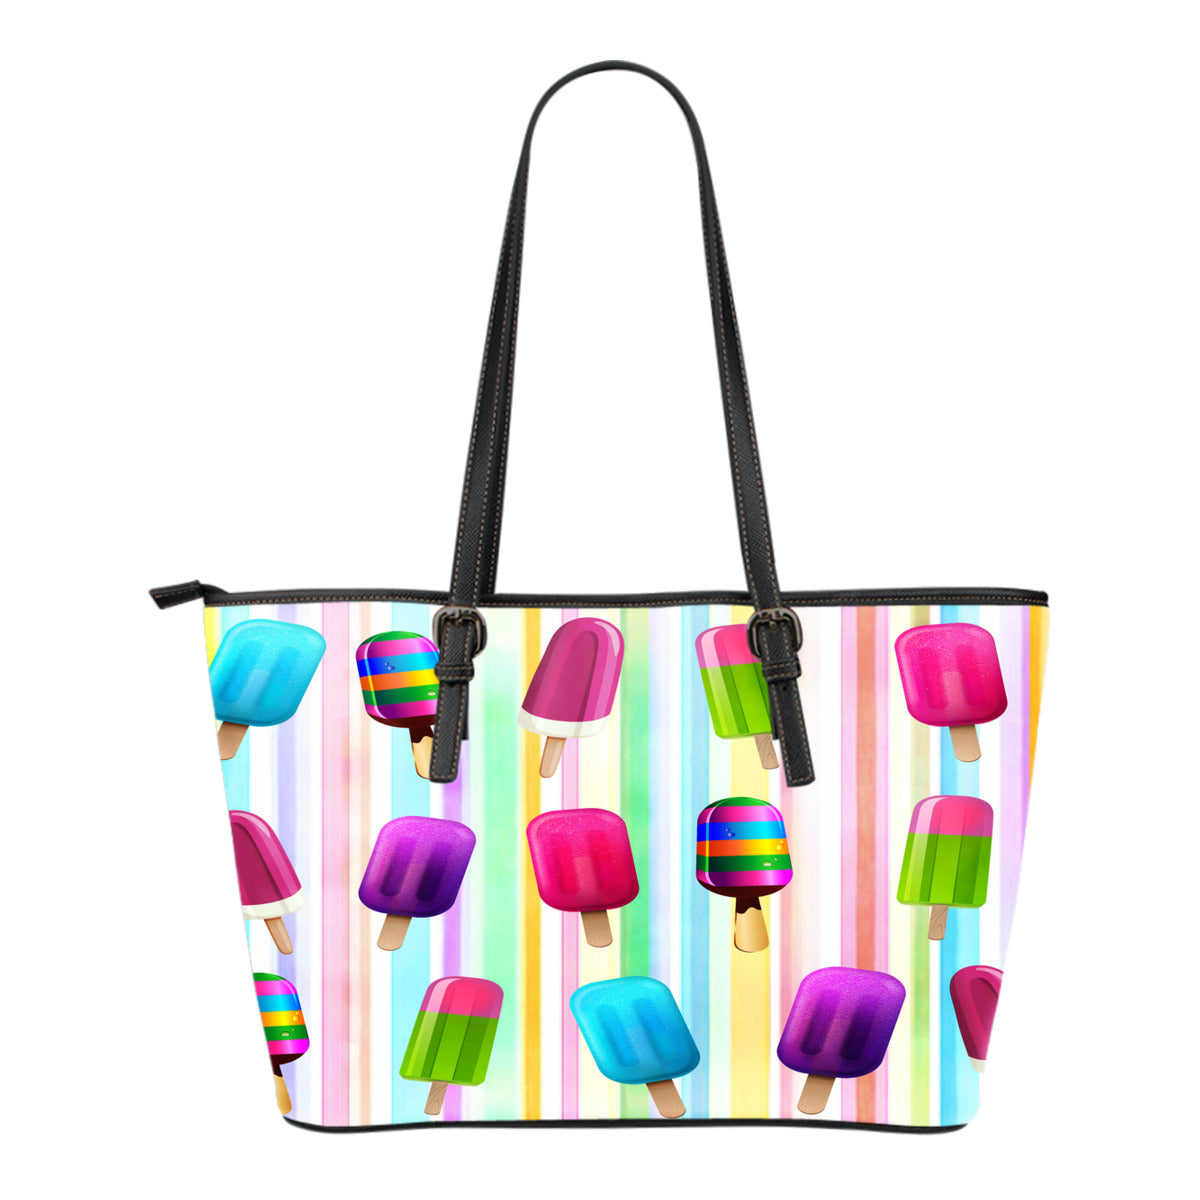 Ice Cream Themed Design C7 Women Small Leather Tote Bag